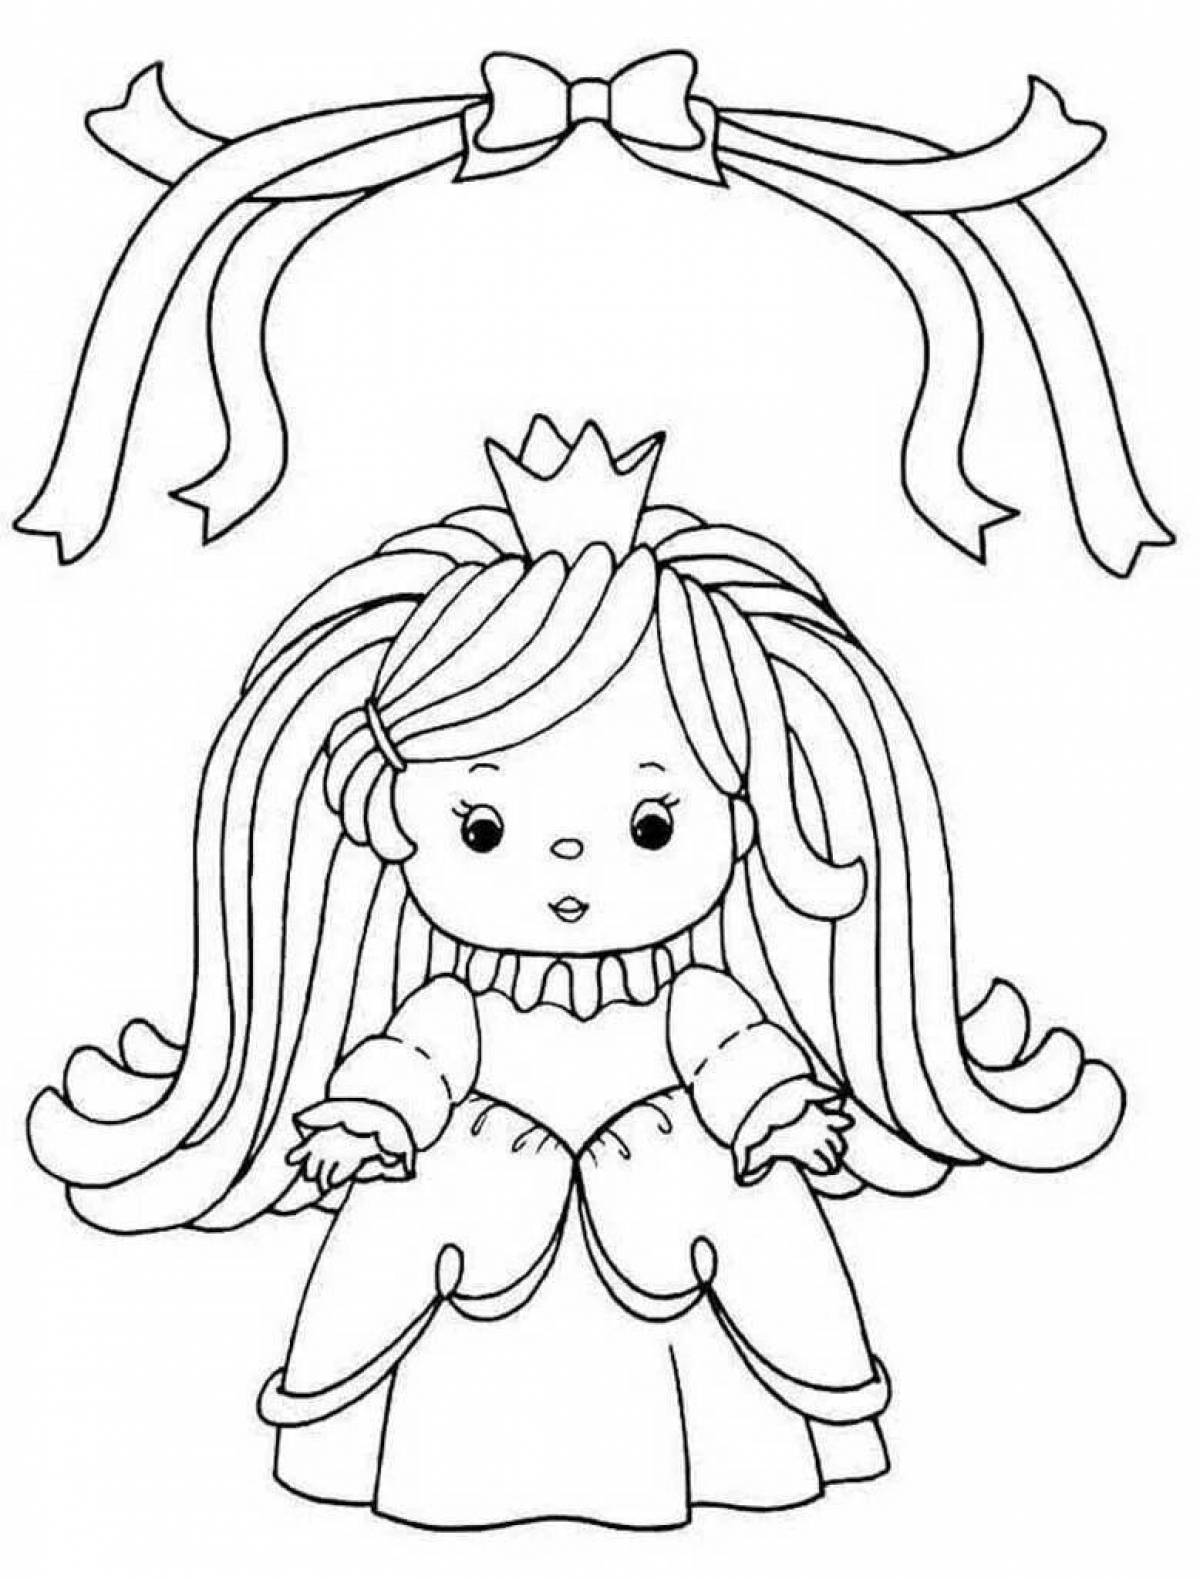 Coloring book sparkling doll